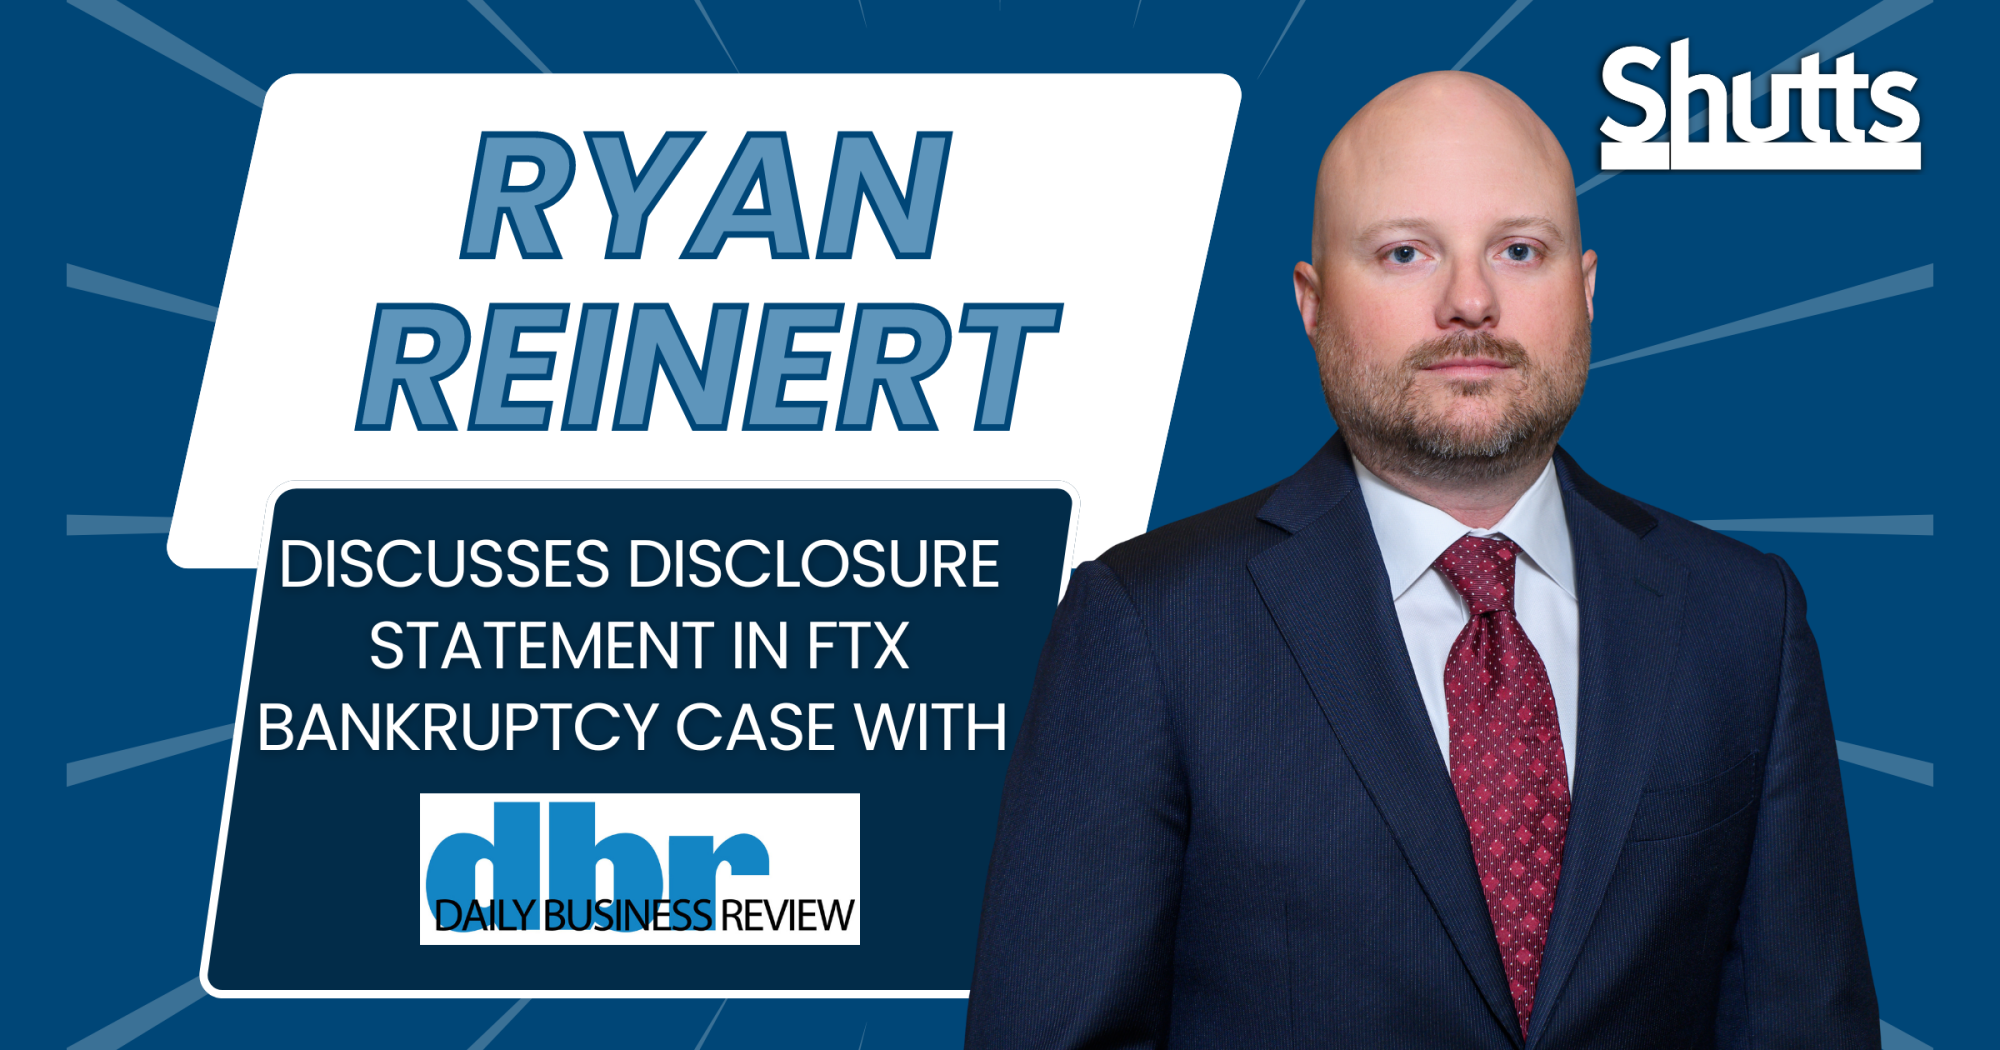 Ryan Reinert Discusses Disclosure Statement in FTX Bankruptcy Case with the Daily Business Review 